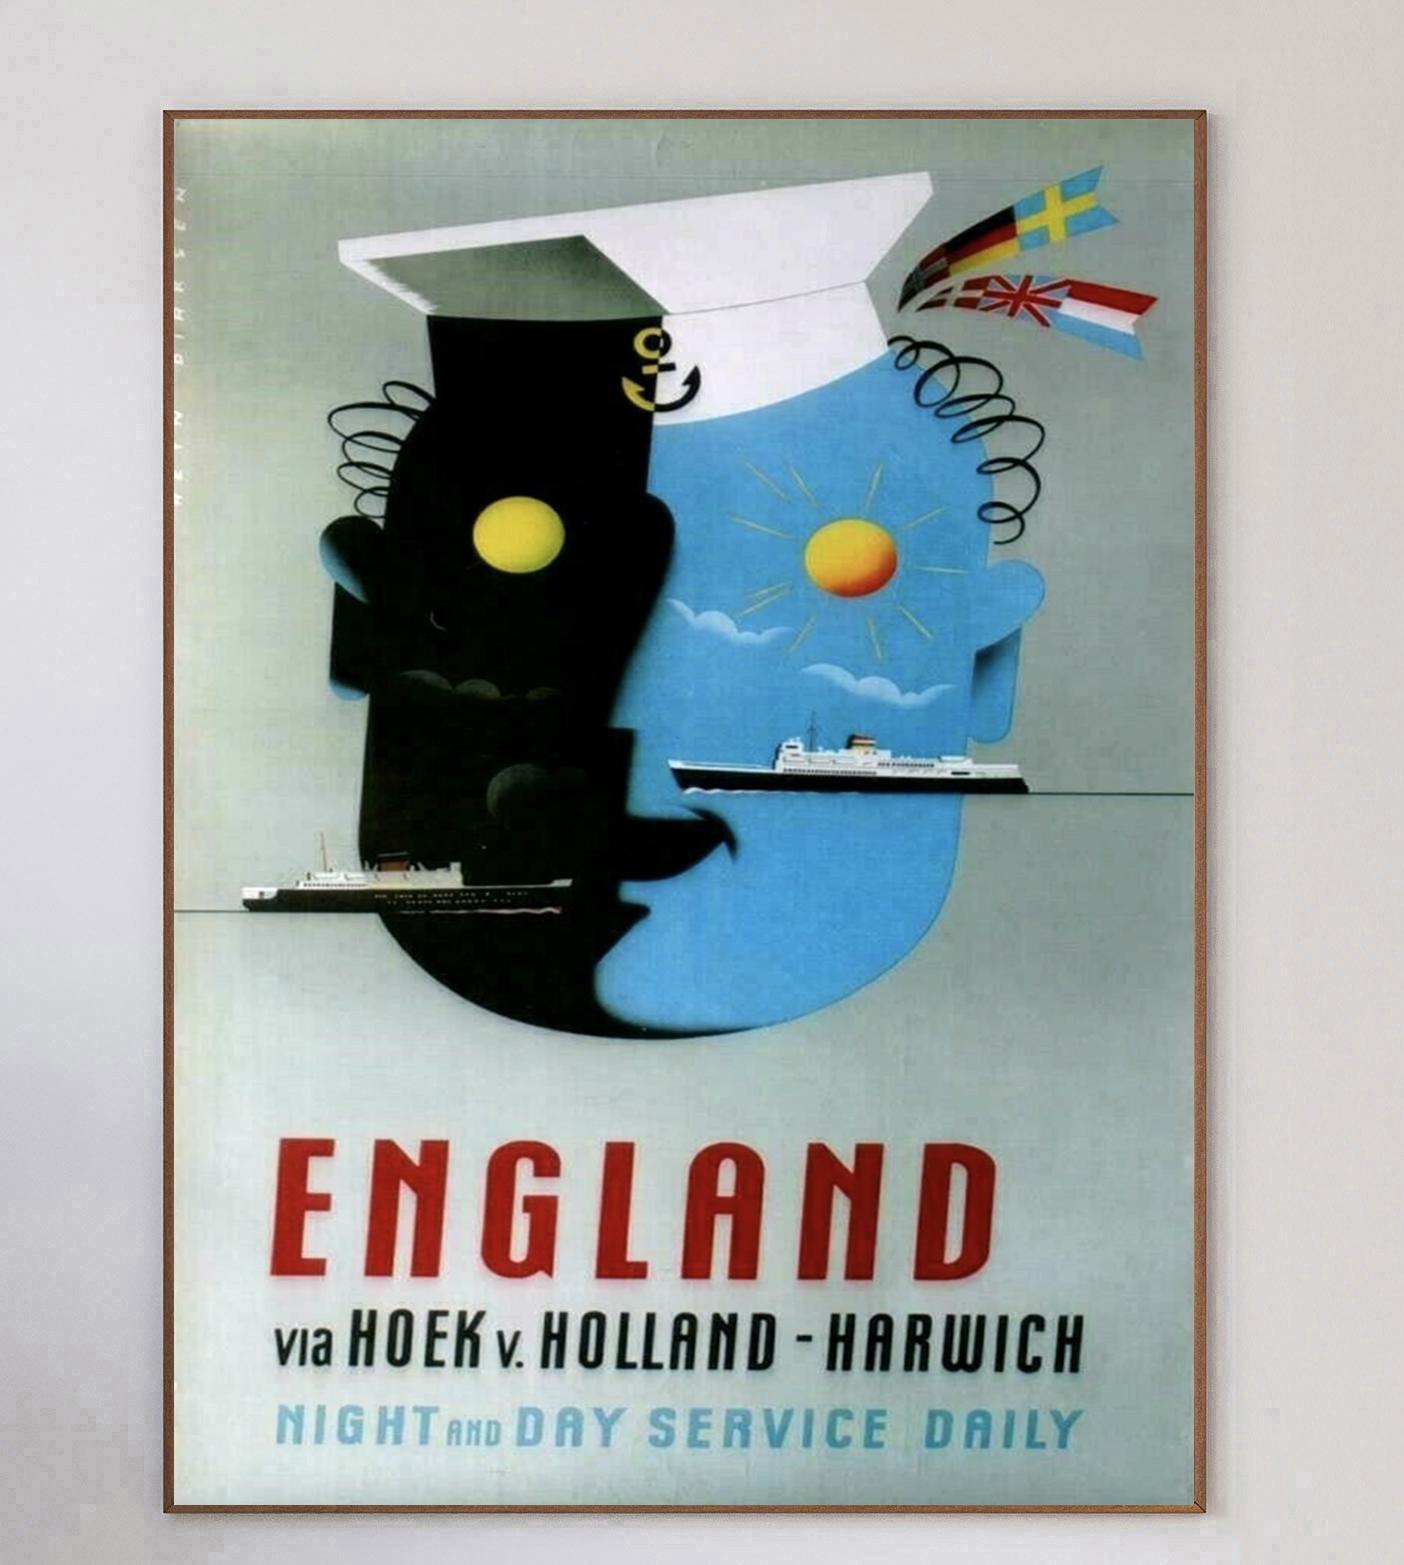 With wonderful & charming design by Reyn Dirksen depicting a sailors face with ships floating across, this poster promoting the ferry line from Holland to England was produced in 1960 and is is true Mid-Century Modern marvel. 

Departing from Hoek